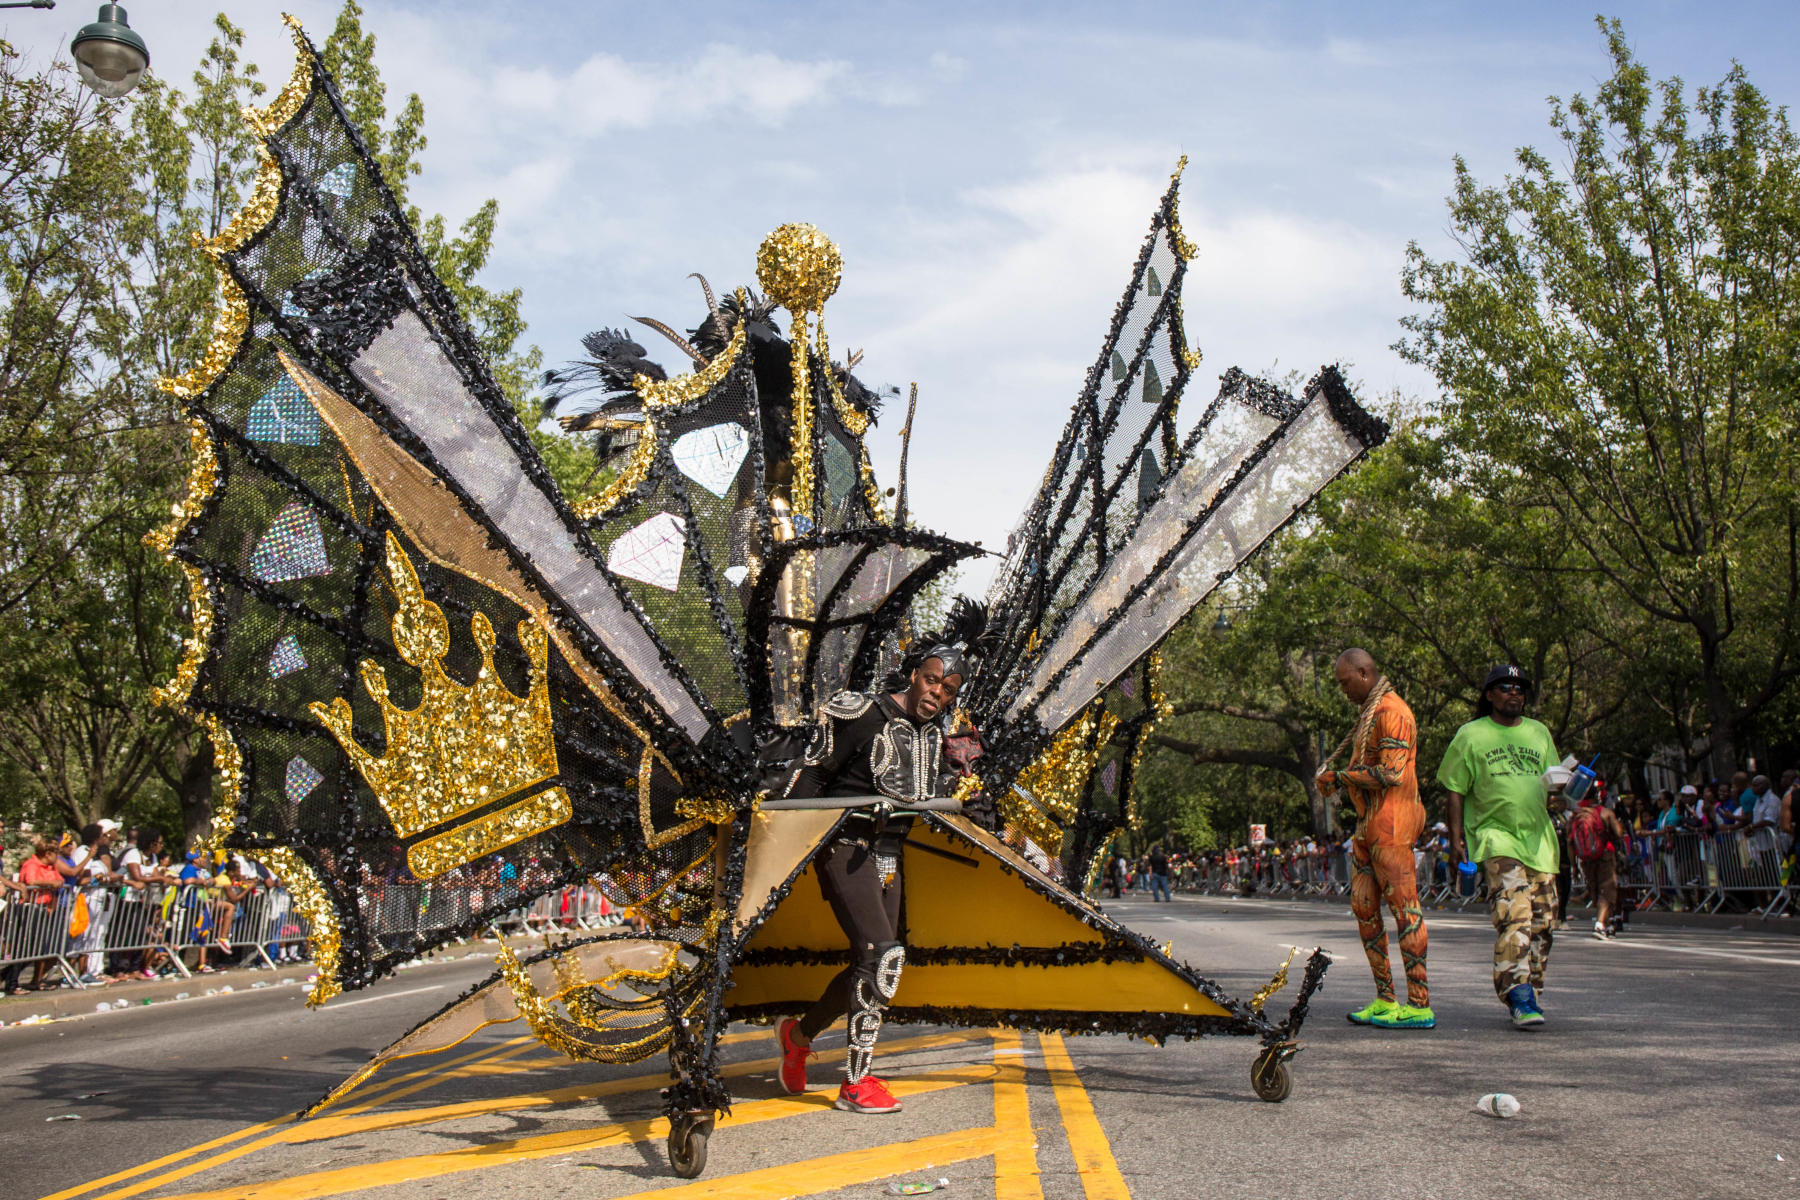 New York Carnival Is Ready For The ‘World Stage’